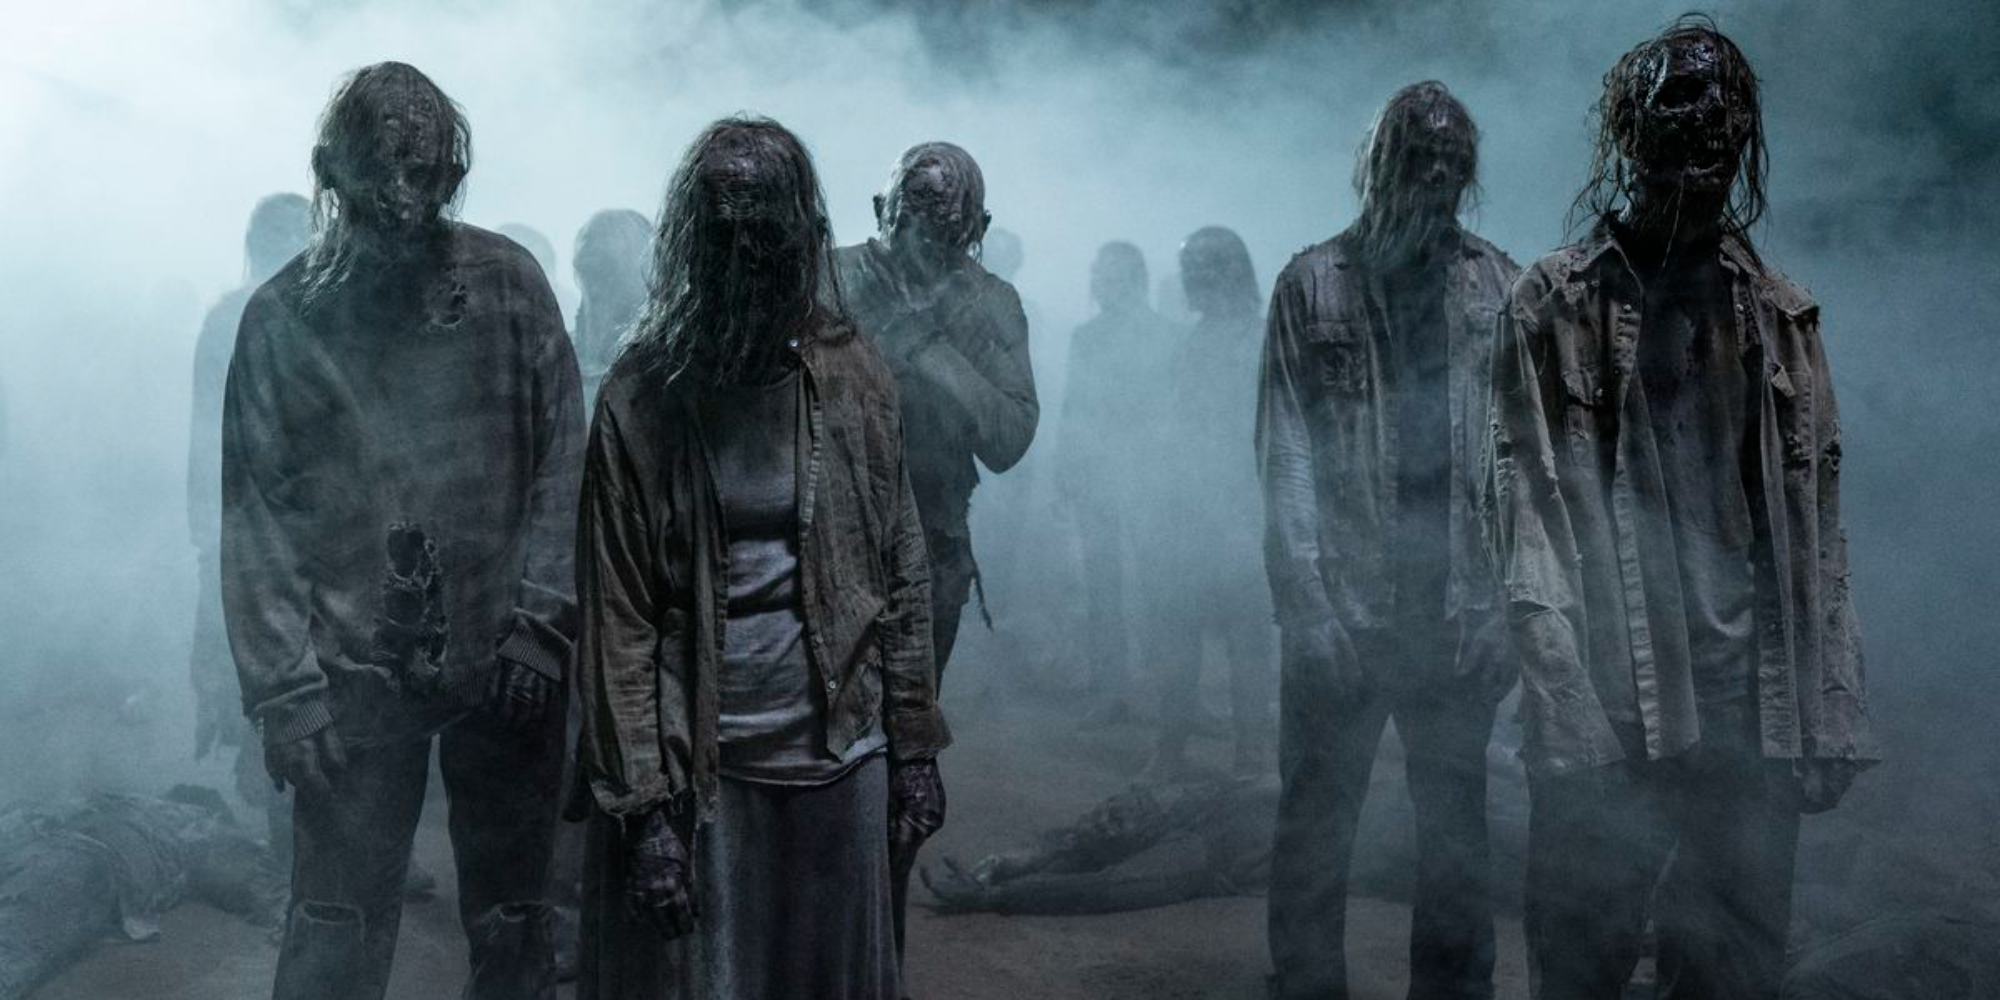 THE WALKING DEAD walkers approach the camera through fog